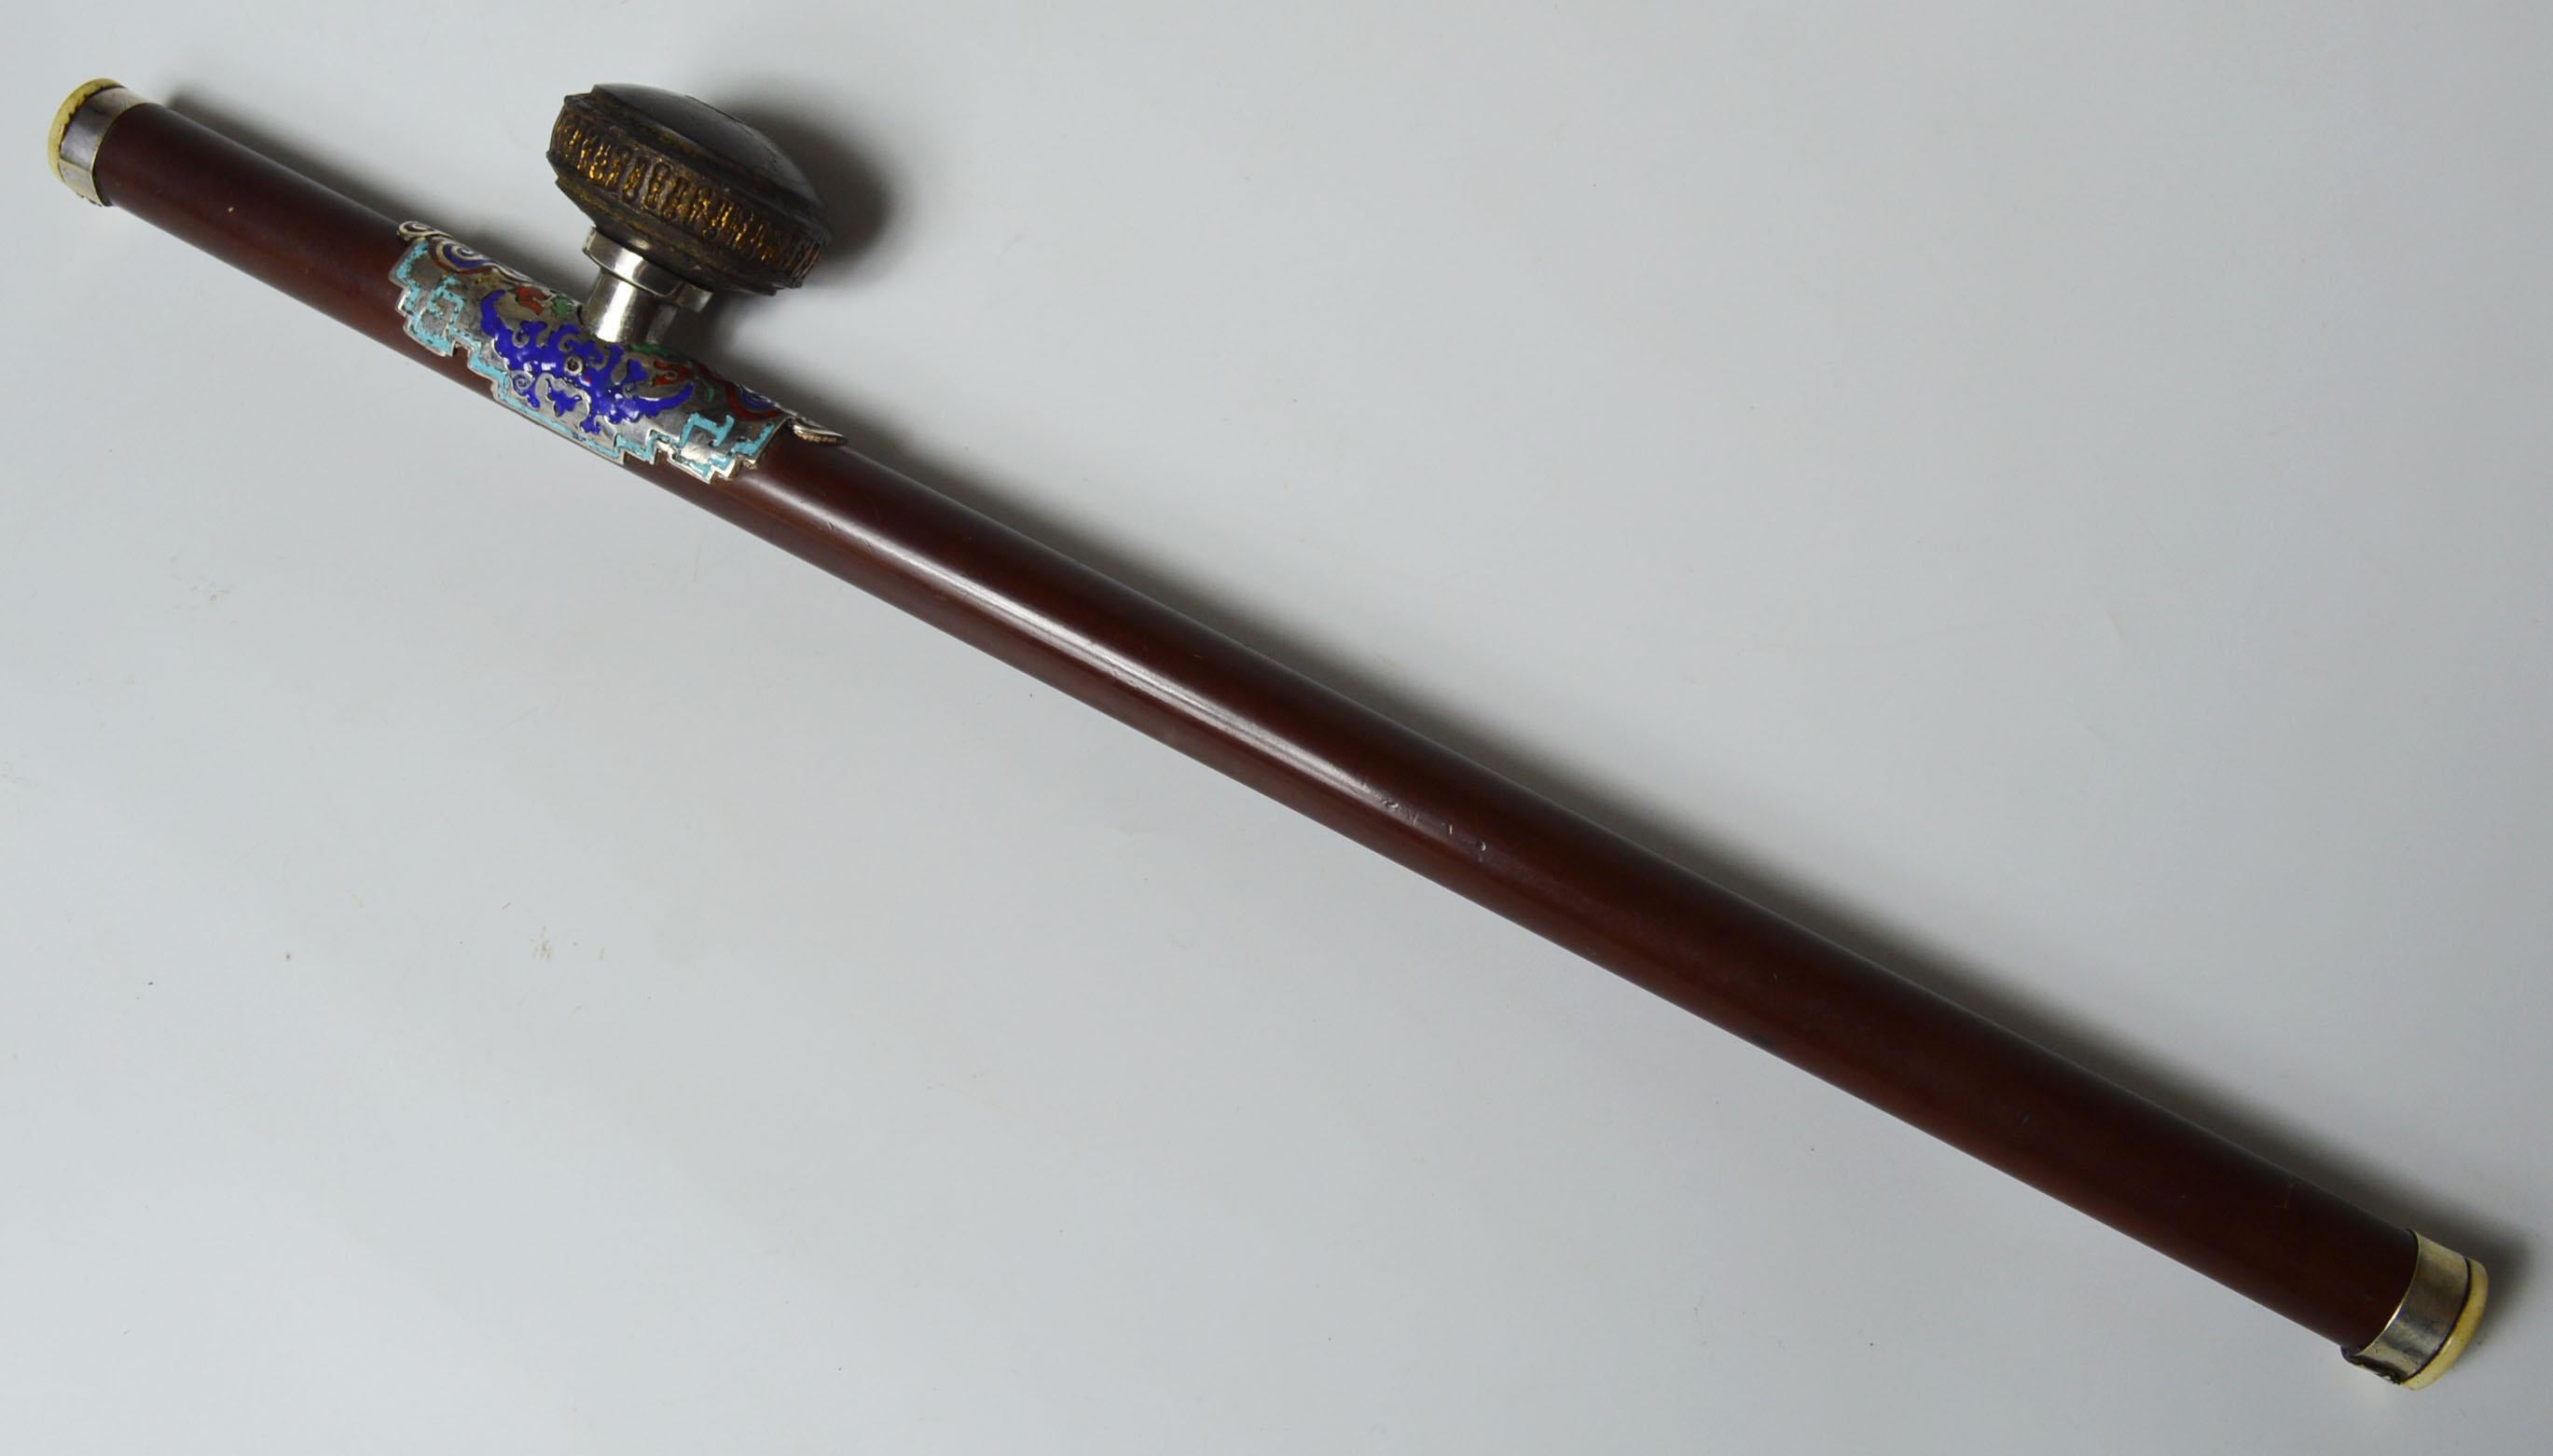 A fine antique Chinese opium pipe
Wood stem with enameled silver, bone ends with original ceramic damper
Period late 19th century.